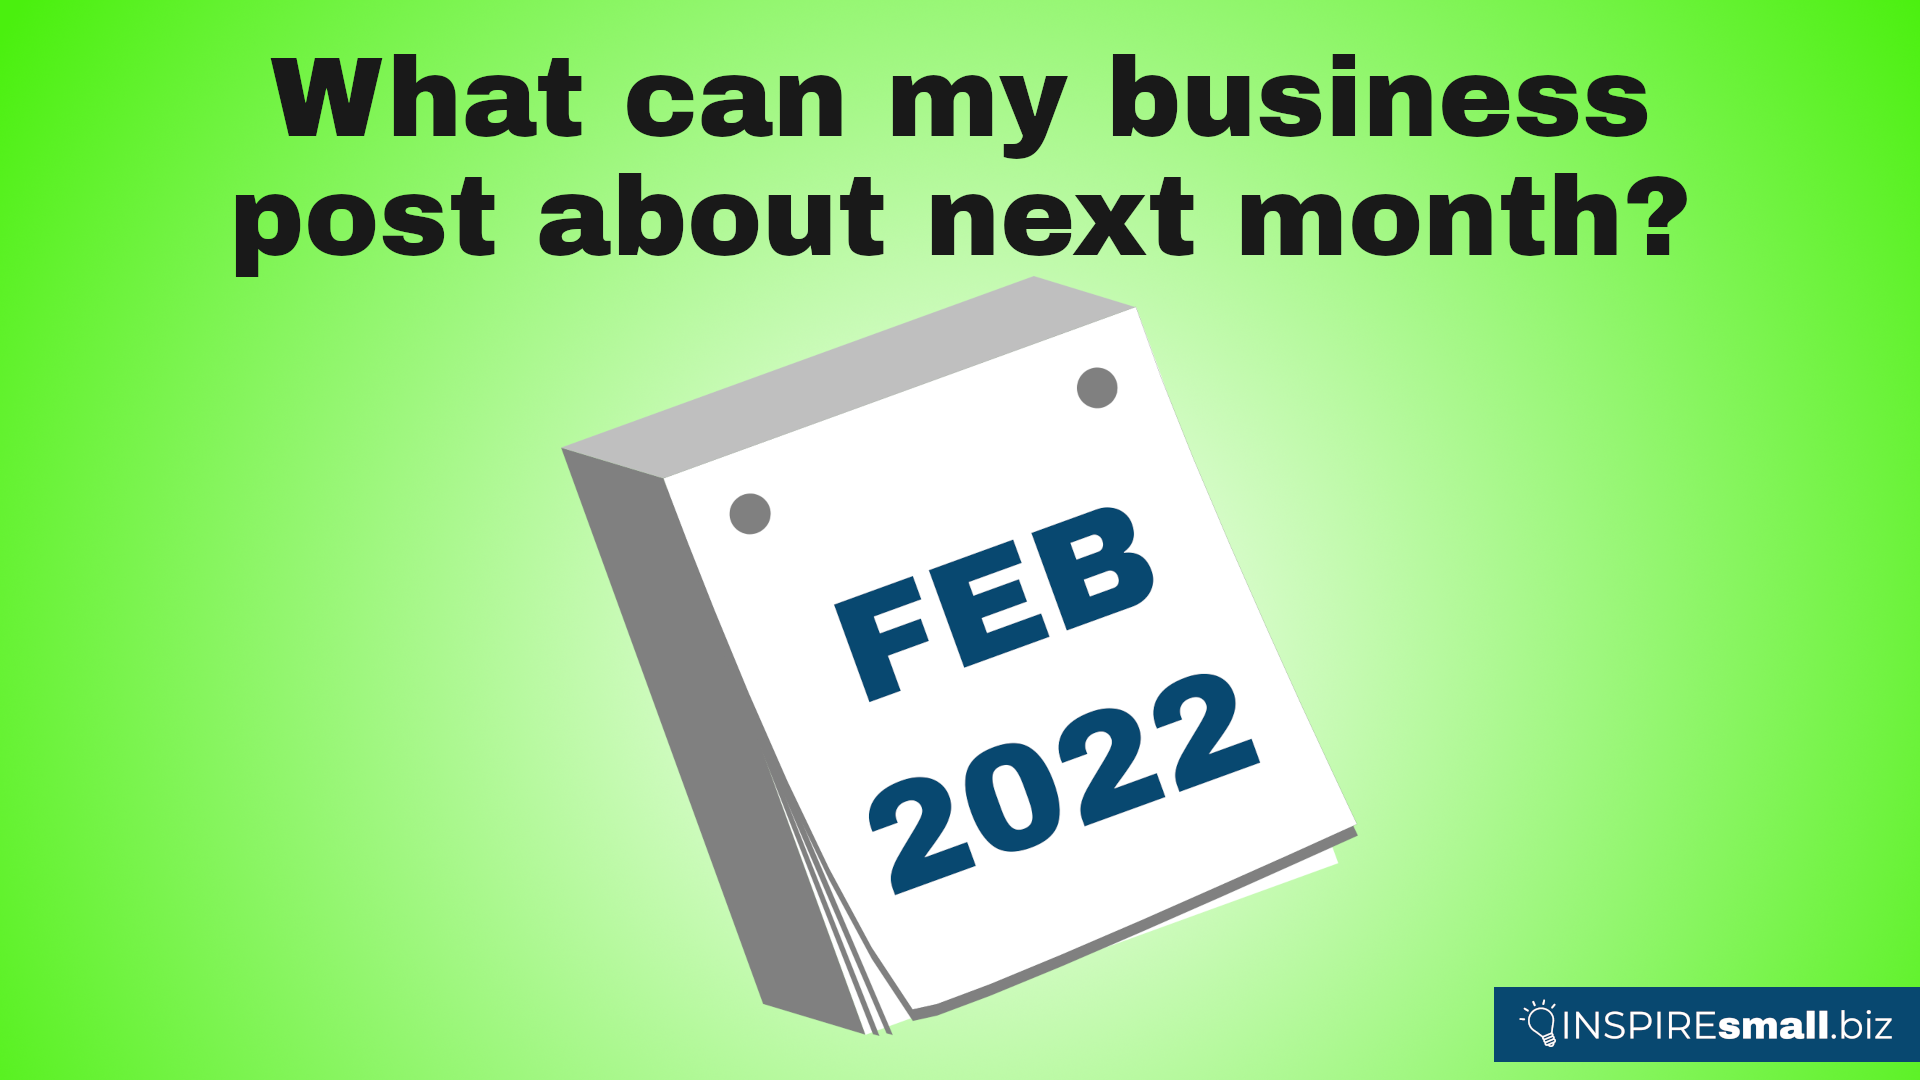 What can my business post about next month? February 2022. Blog from INSPIREsmall.biz